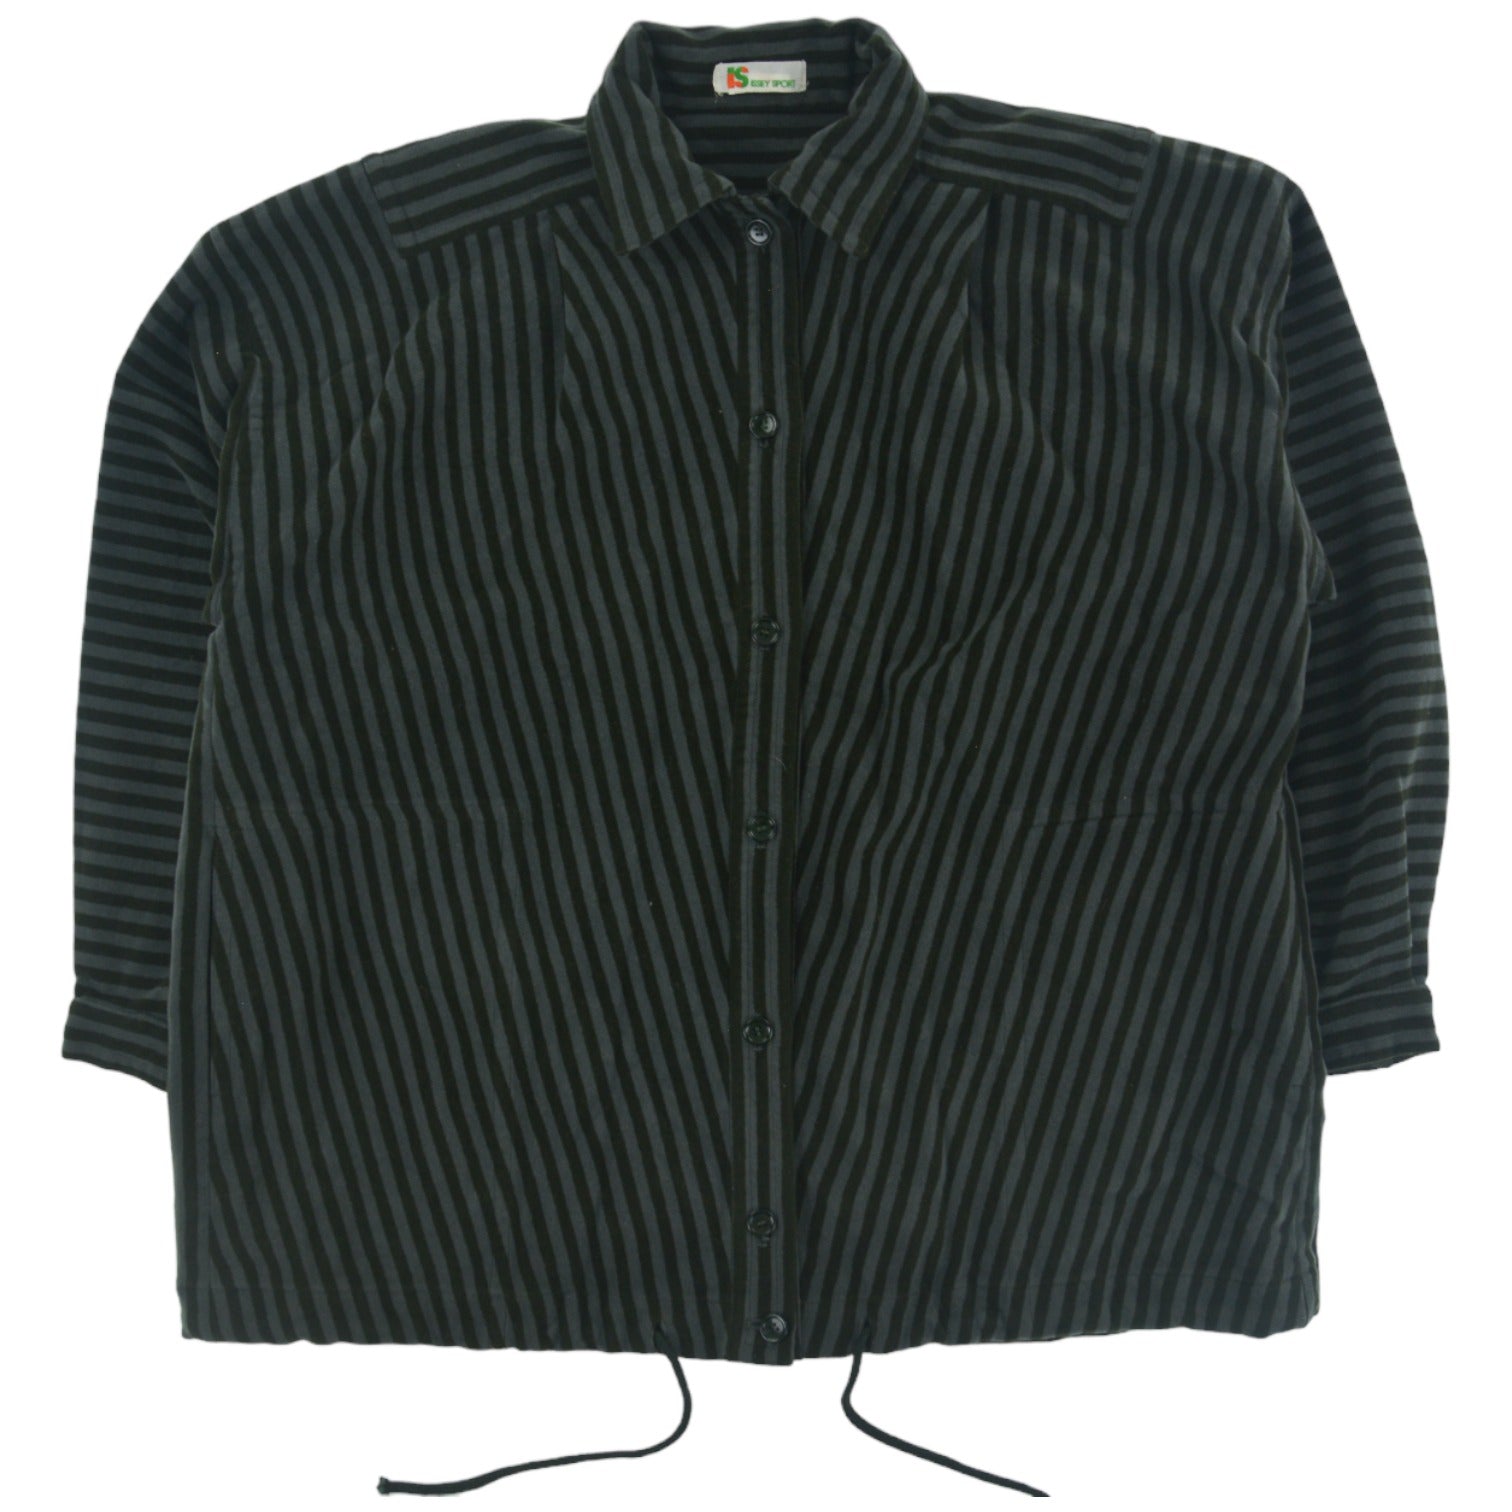 Vintage Issey Miyake 'ISSEY SPORT' Striped Over Shirt Size M ...